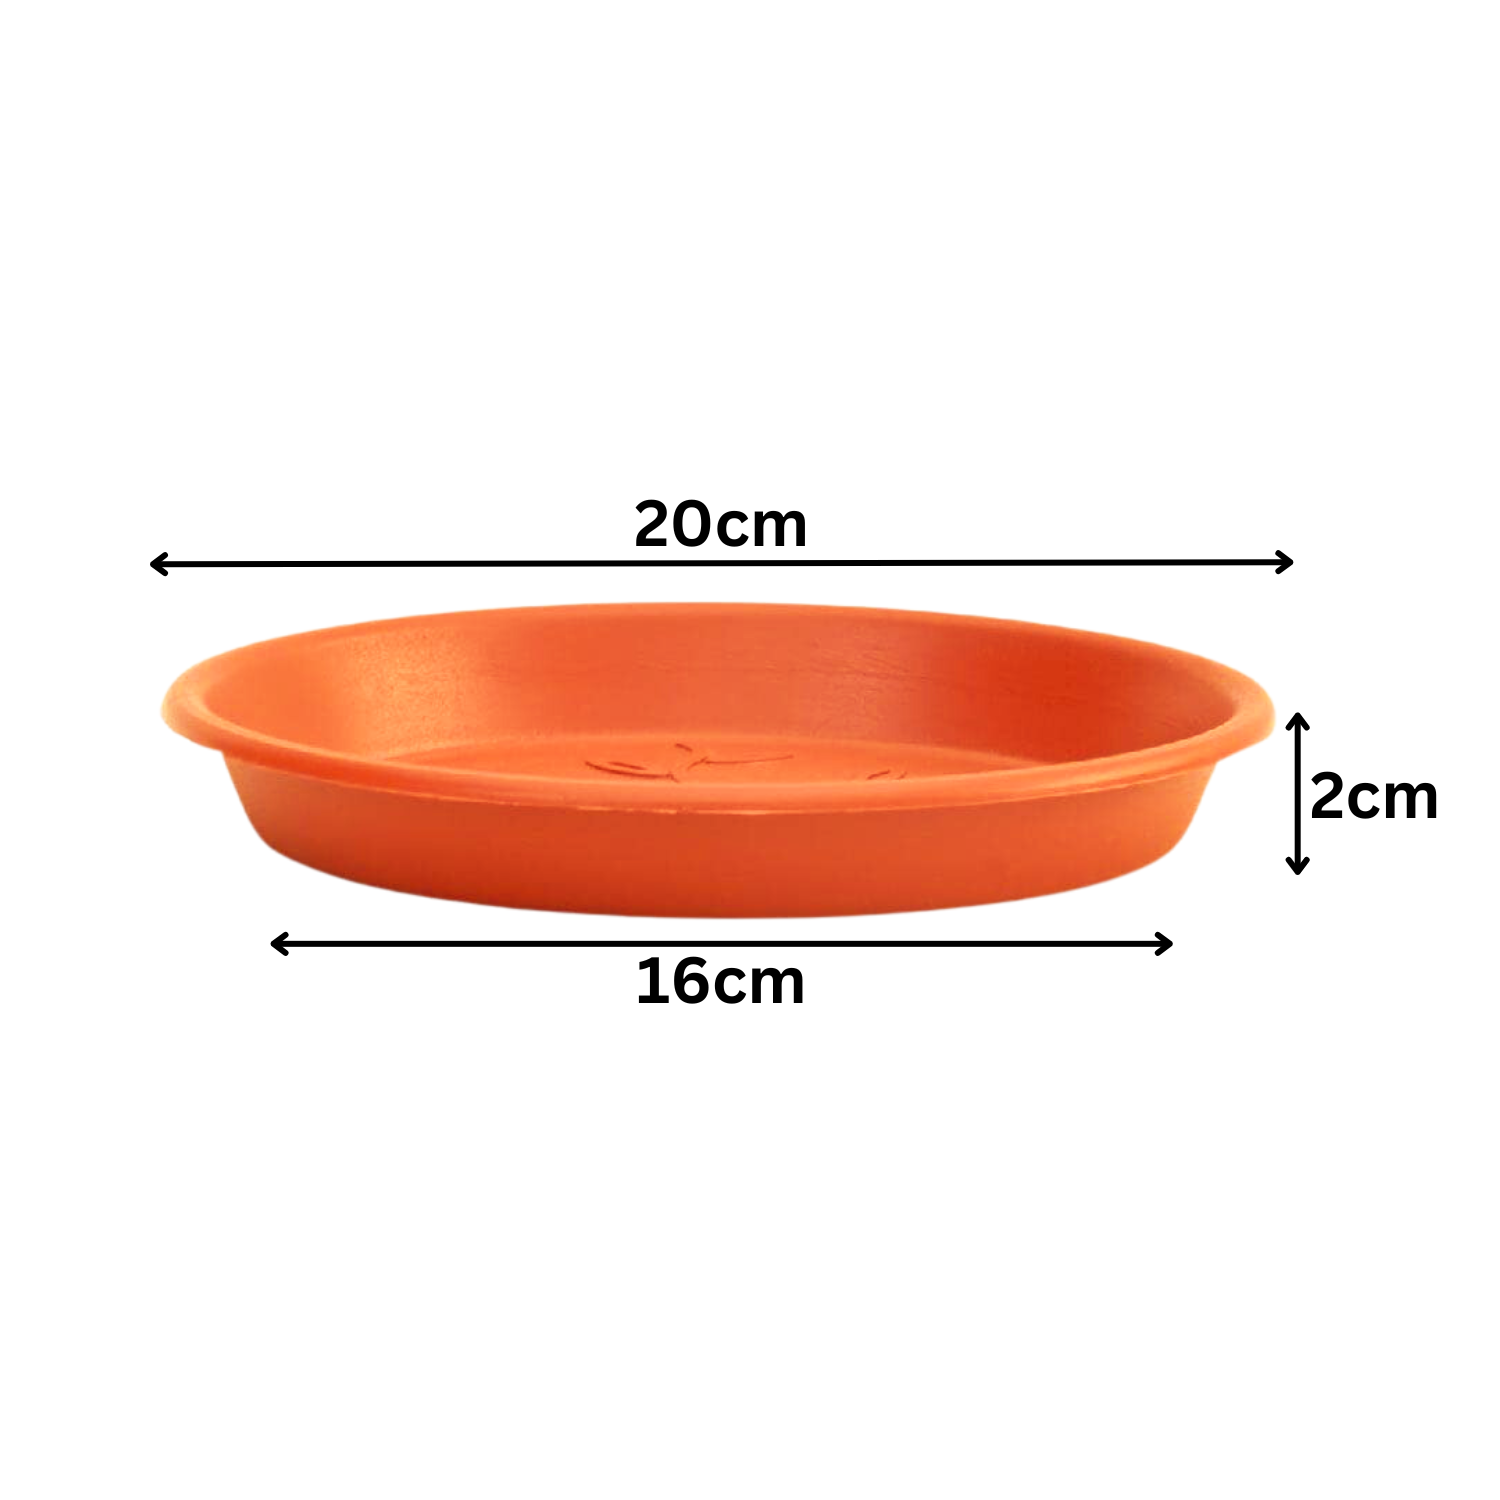 Hug A Plant|UV Treated Round Bottom Tray Suitable for 8 inch Round Plastic Pot|Heavy Duty Highly Durable Tray for Indoor Home & Garden Decor (20CM|8INCH )